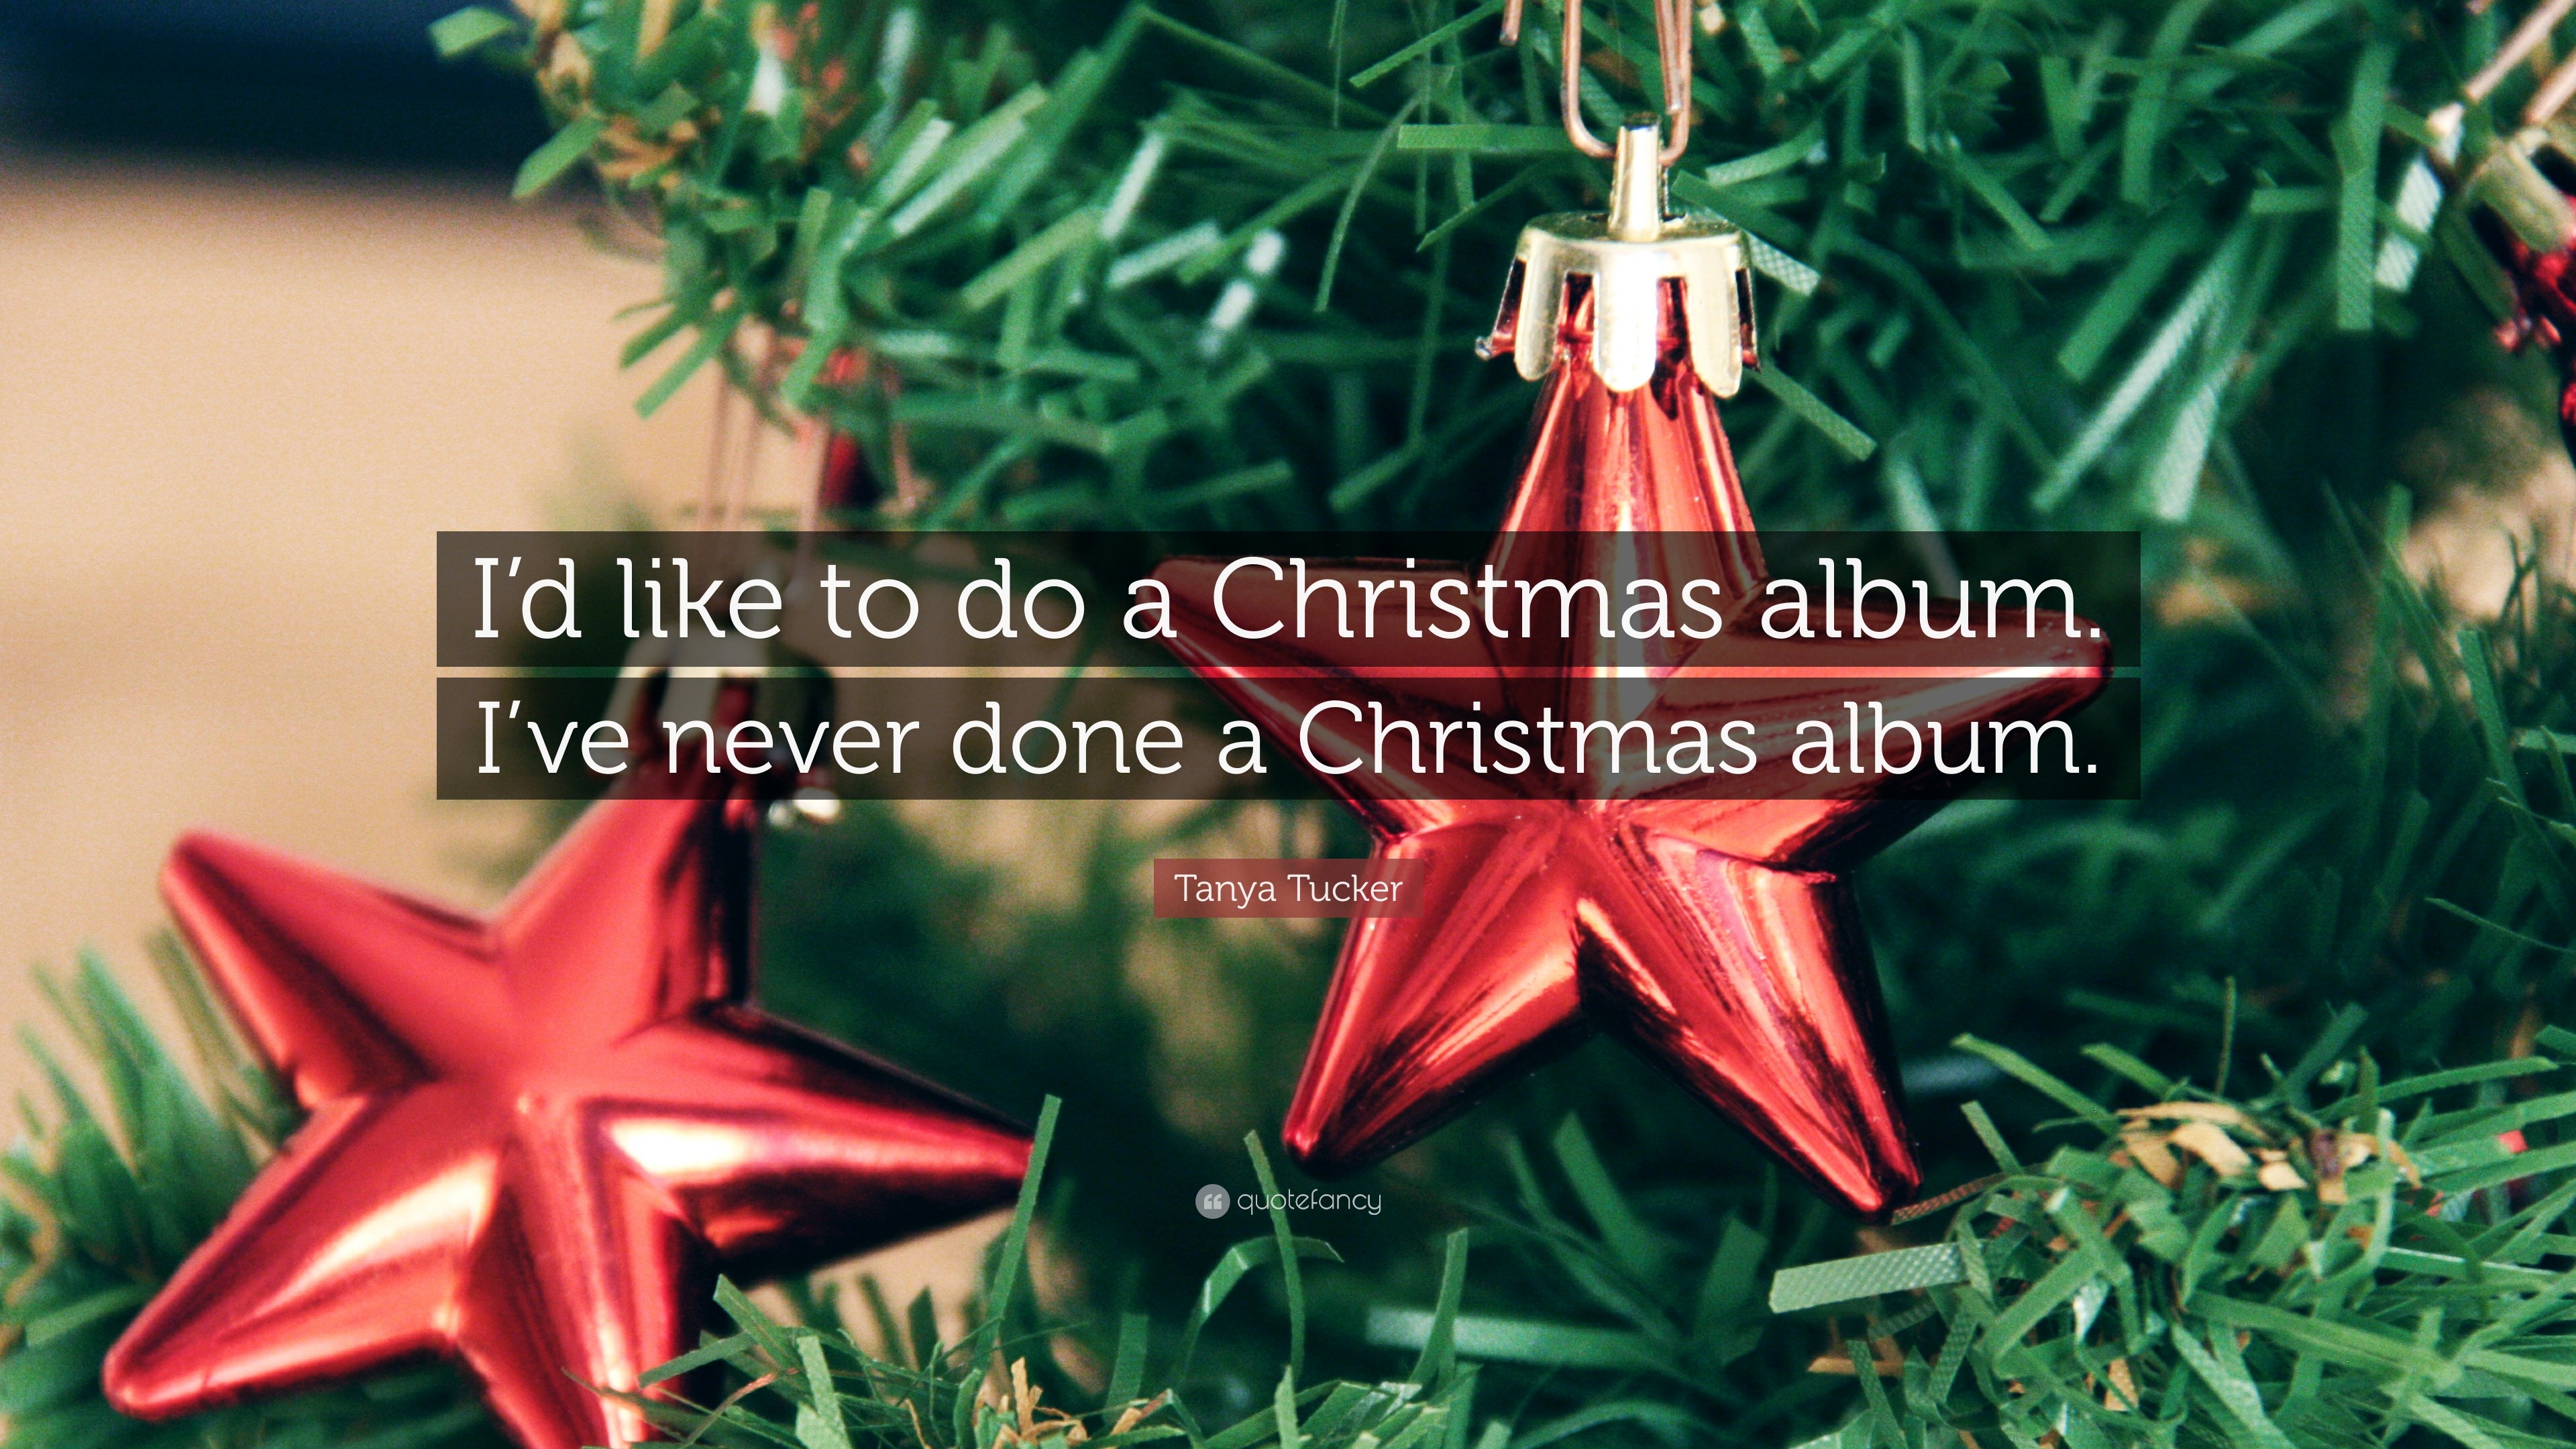 Tanya Tucker Quote: “I’d like to do a Christmas album. I’ve never done a ...